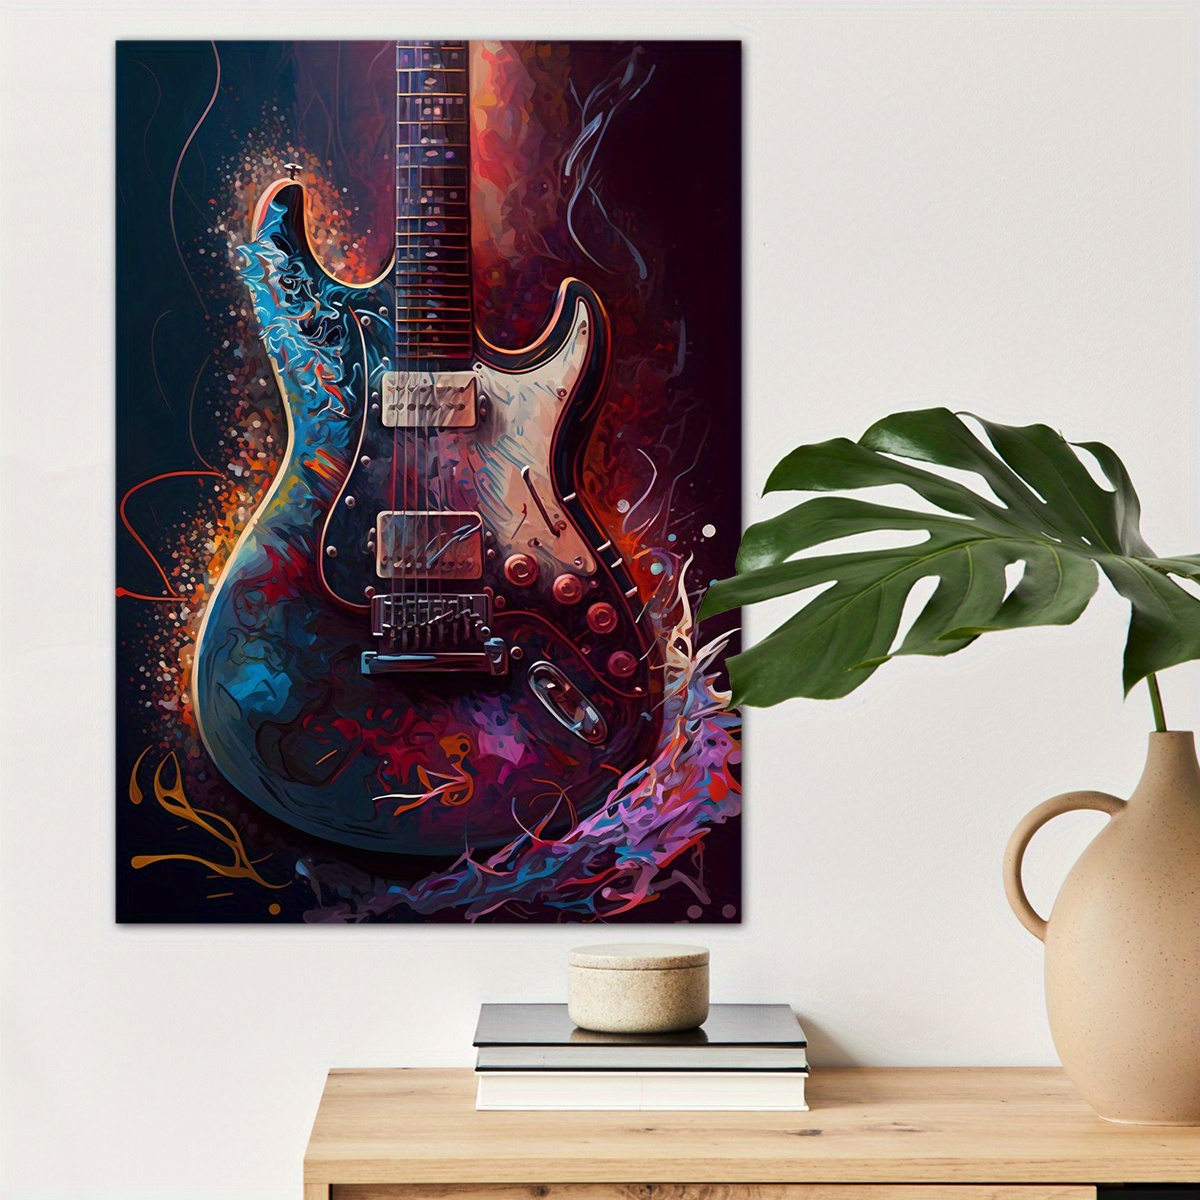 

1pc, Guitar Oil Painting Canvas Wall Art For Home Decor, Music Lovers Wall Decor, Canvas Prints For Living Room Bedroom Bathroom Kitchen Office Cafe Decor, Perfect Gift And Decoration